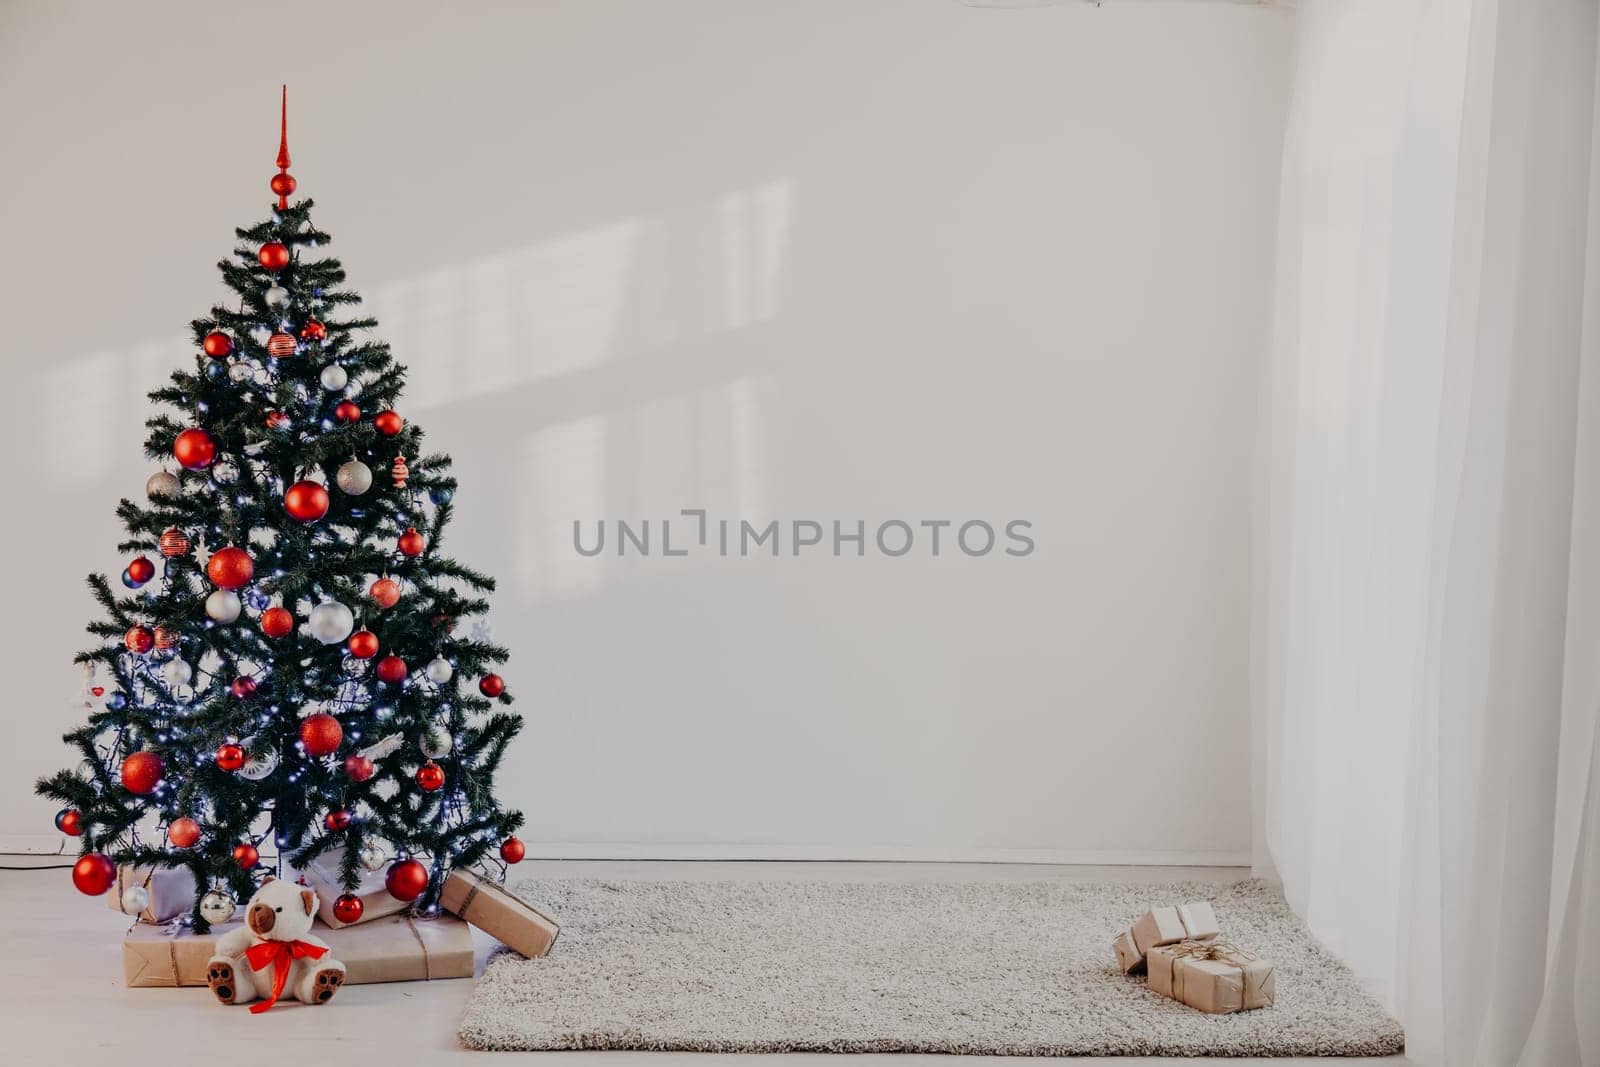 Christmas tree in a white room for Christmas with gifts 2